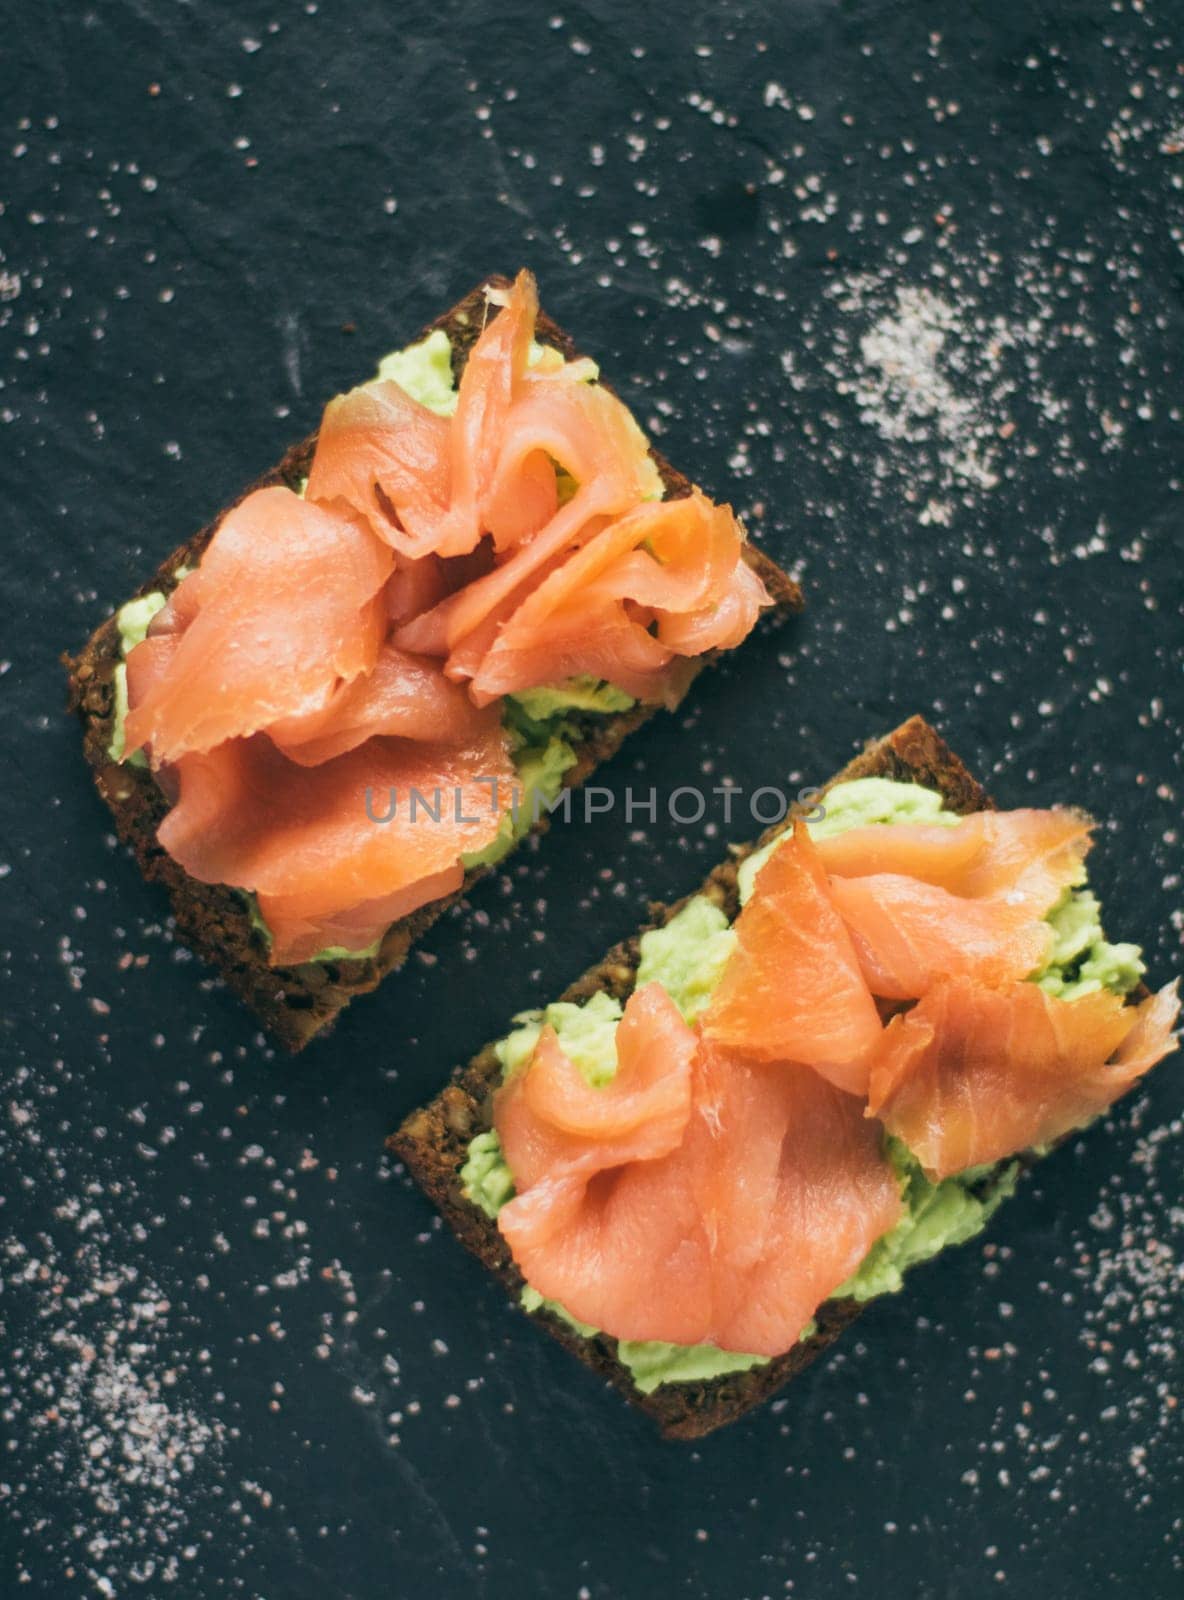 smoked salmon sandwich - healthy snacks and homemade food styled concept, elegant visuals